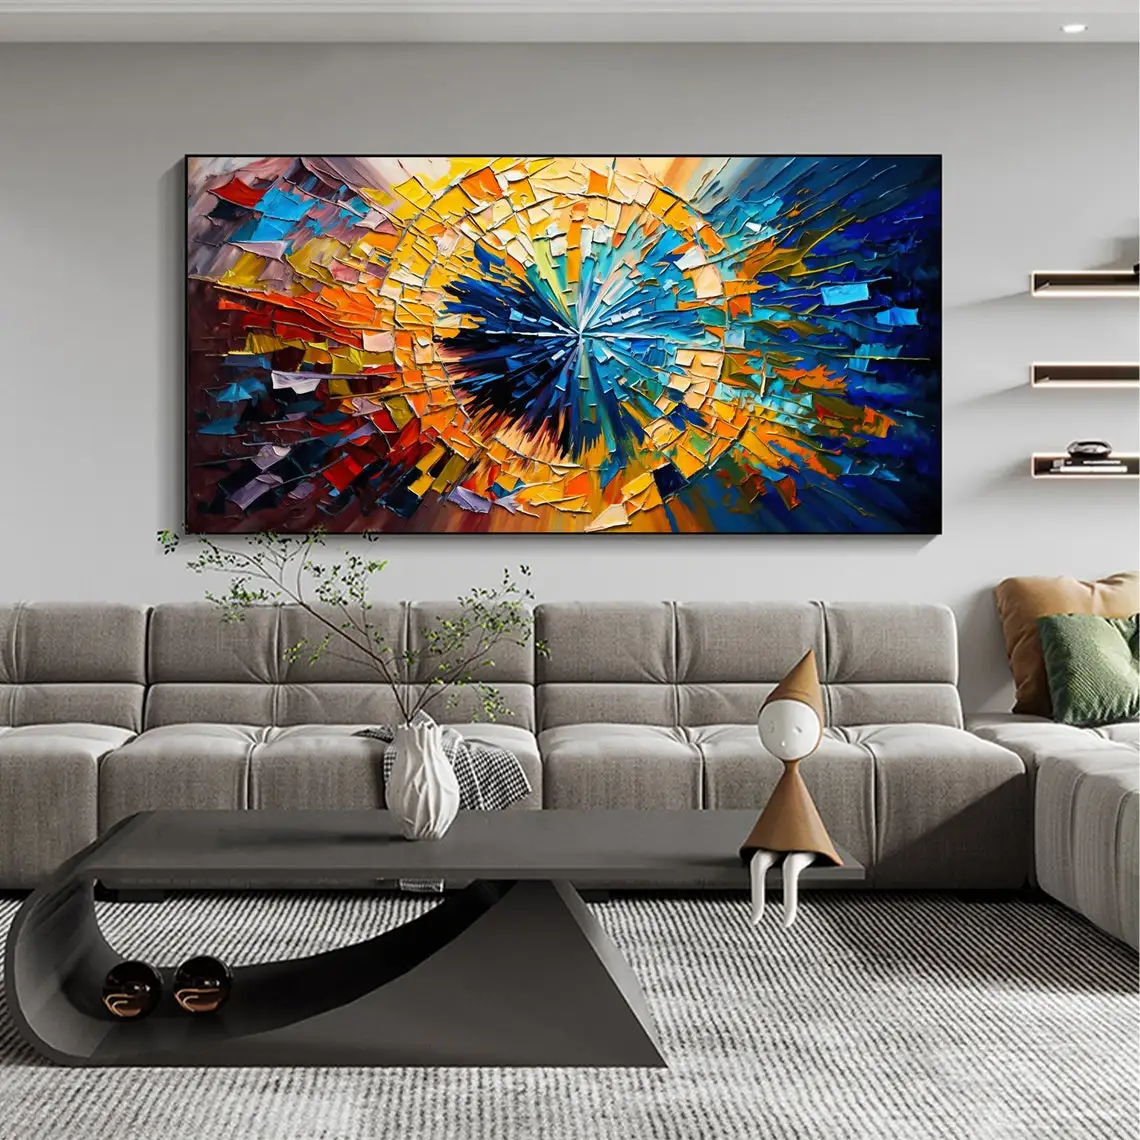 Colorful Oil Painting On Canvas Large Wall Art Abstract Textured Hand Painted Painting Custom Painting Living Room Wall Decor